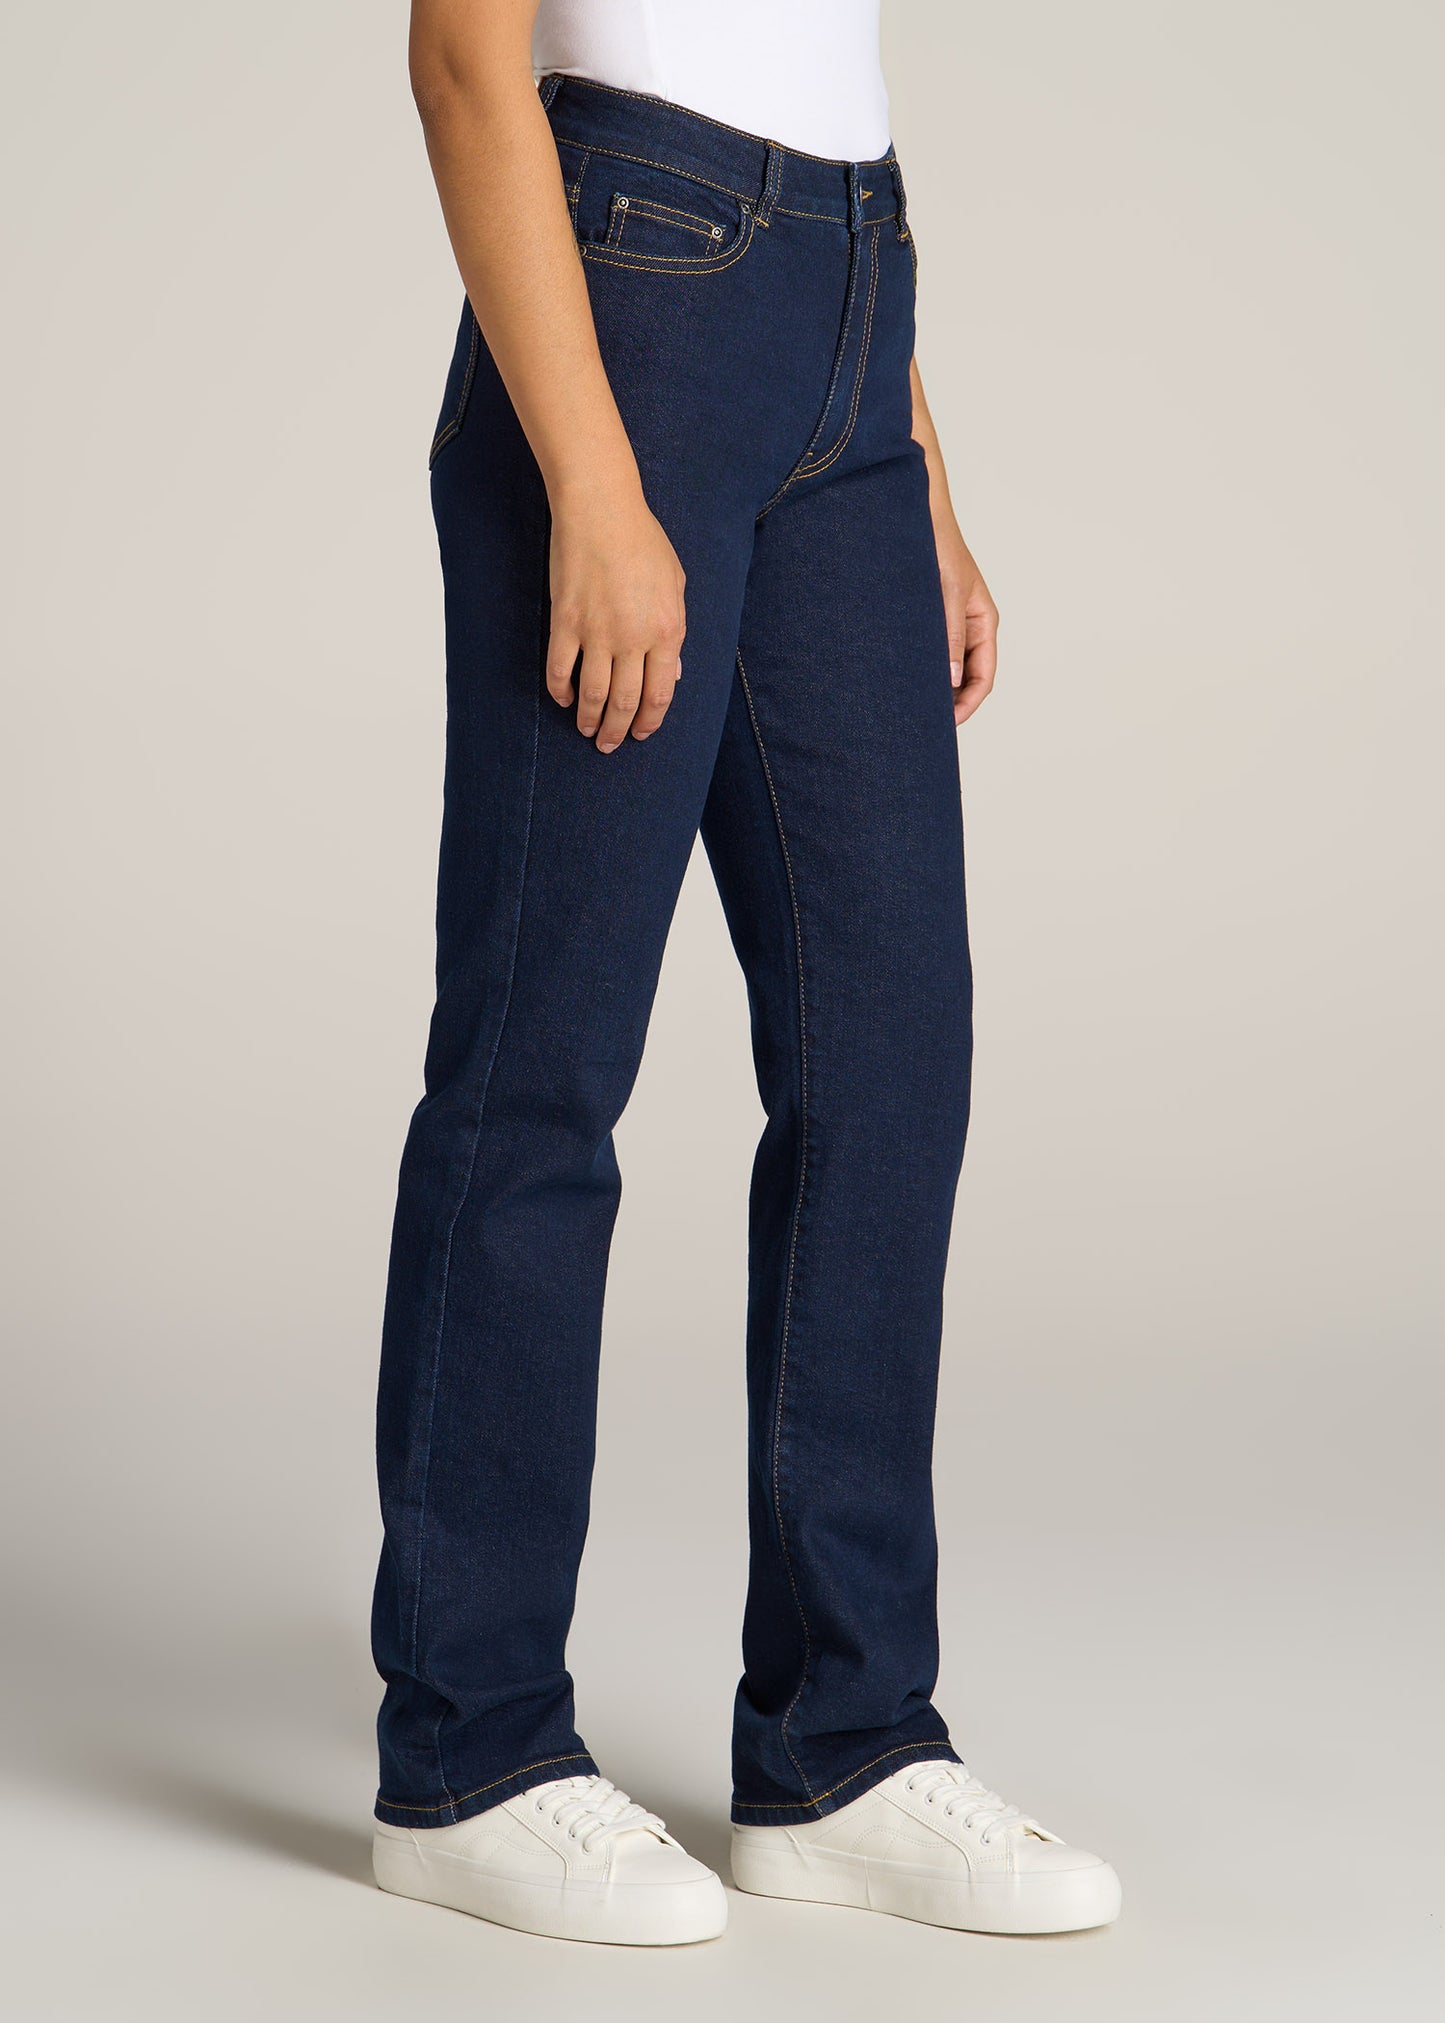 American-Tall-Women-Harper-High-Rise-Straight-Stretch-Jeans-Ink-Blue-side